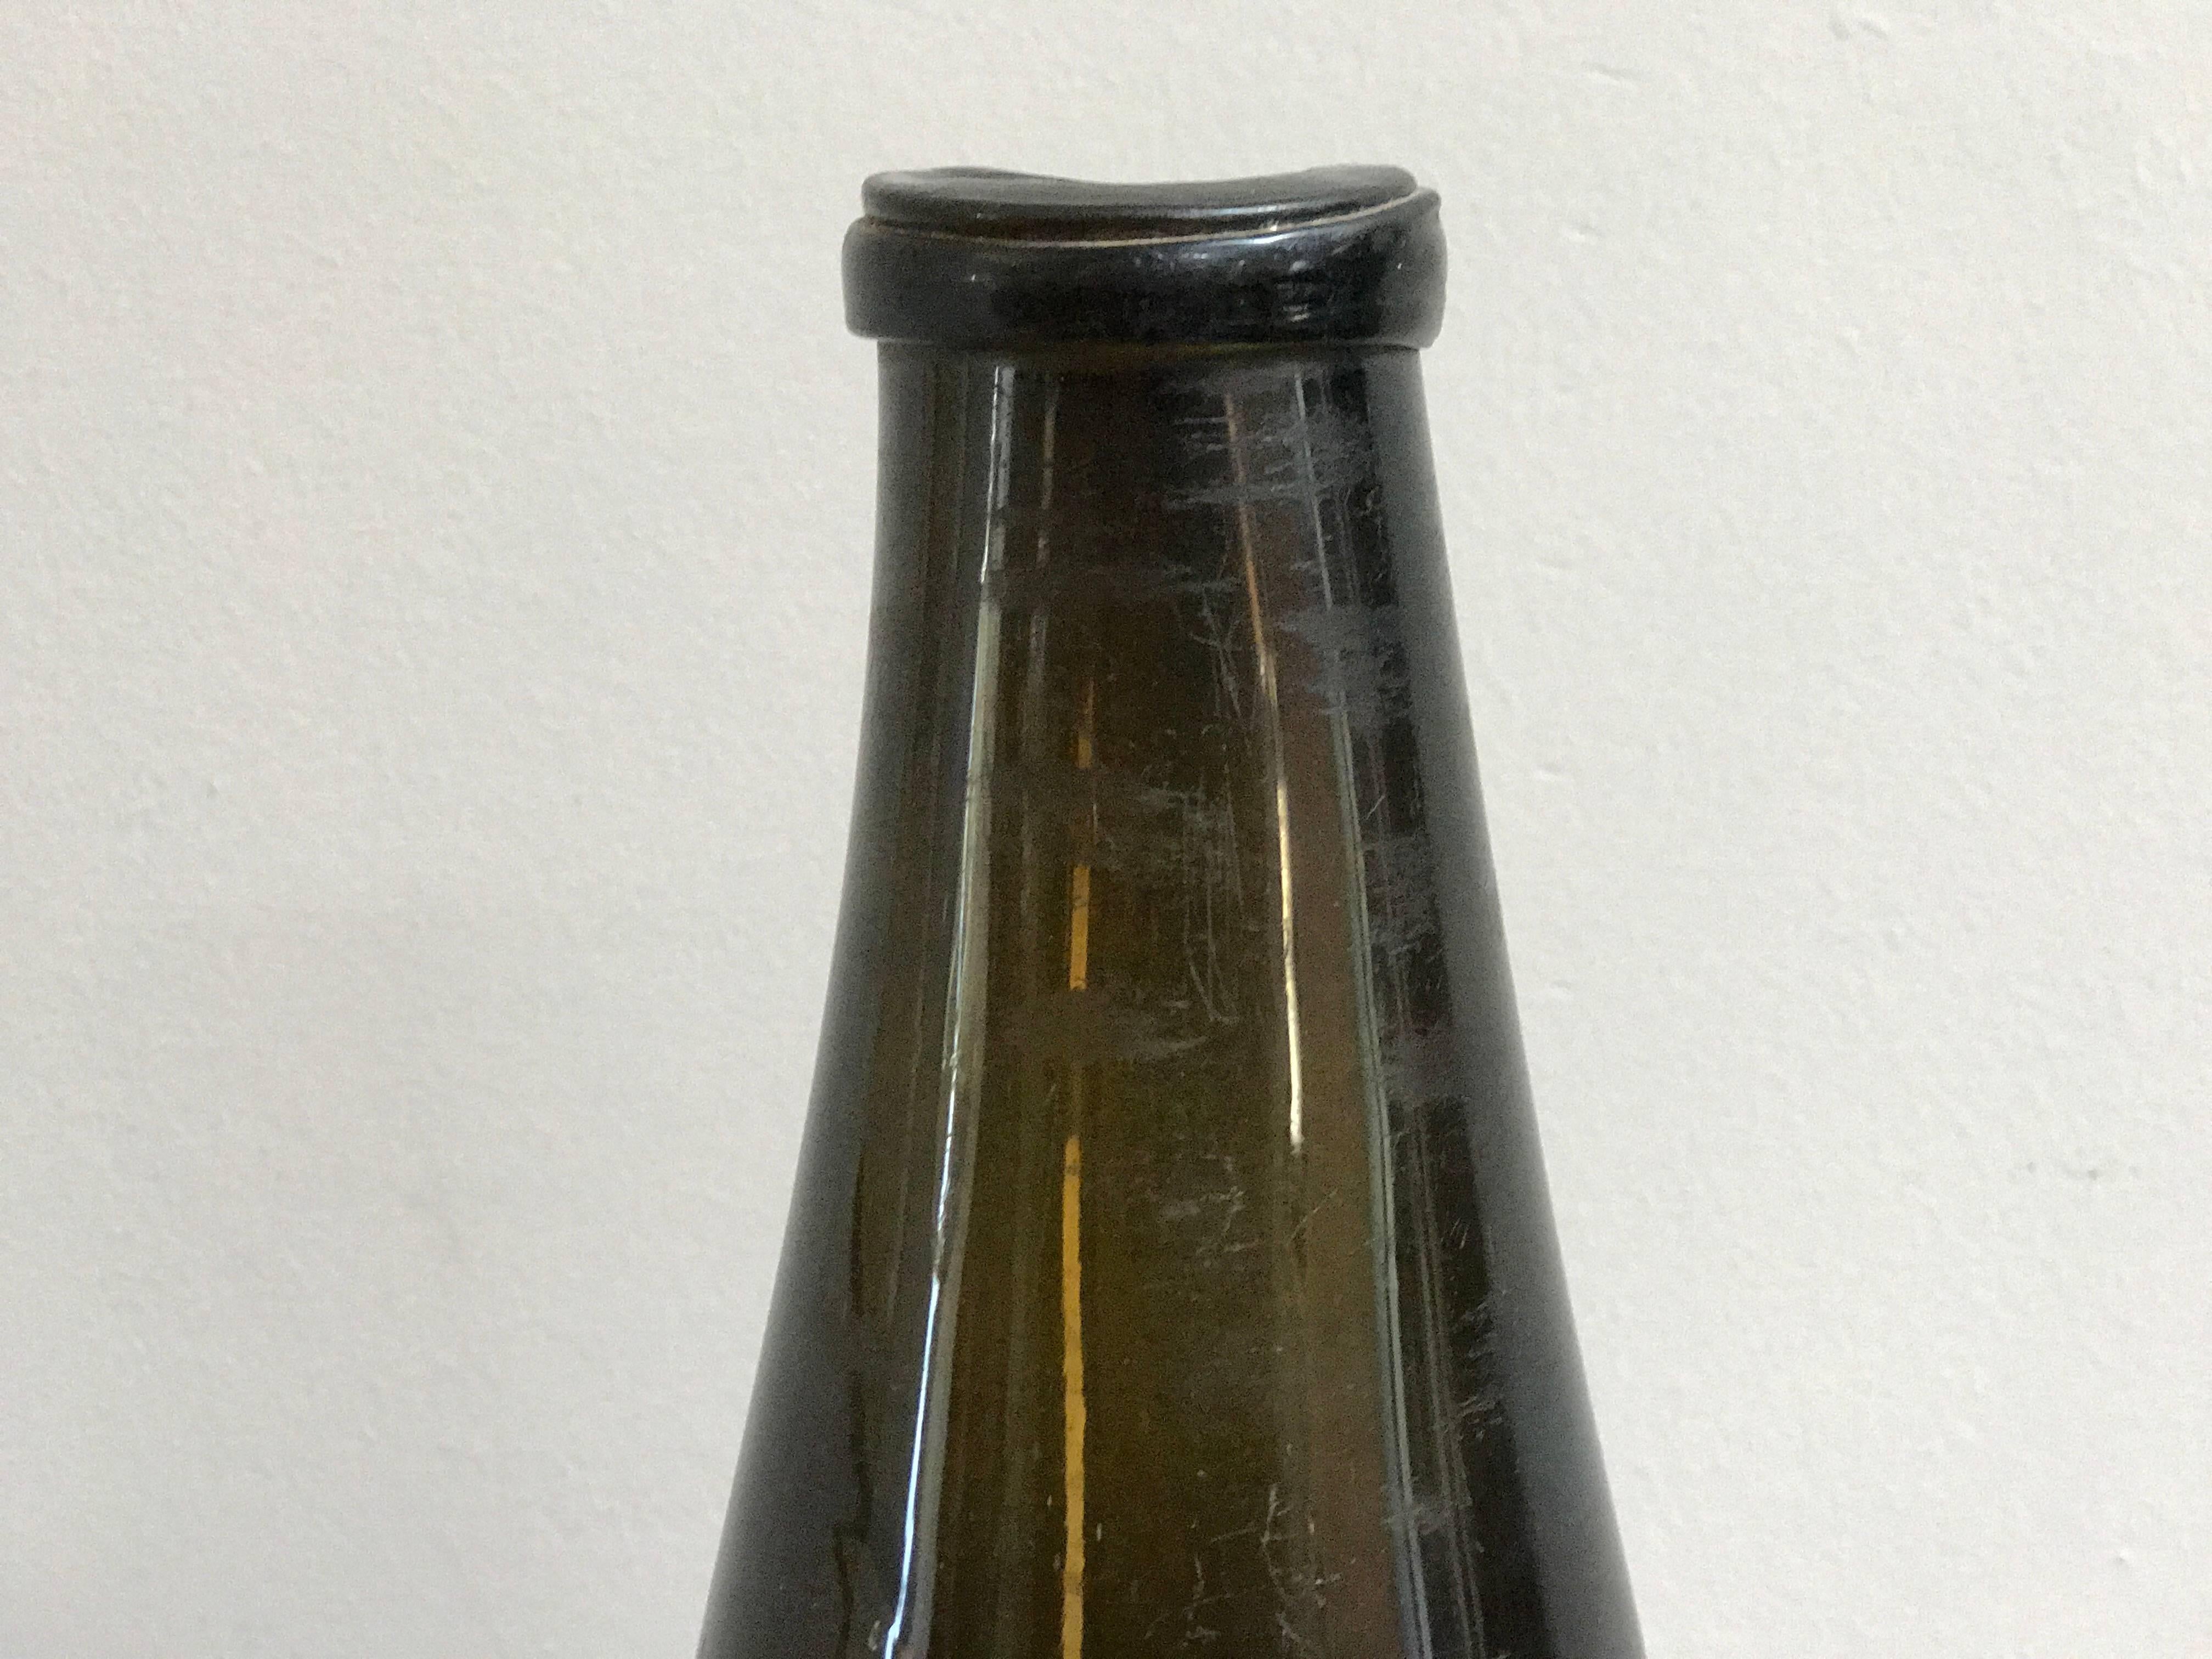 Victorian Unique Shaped Green Bottle or Vase from Late 19th Century France. 